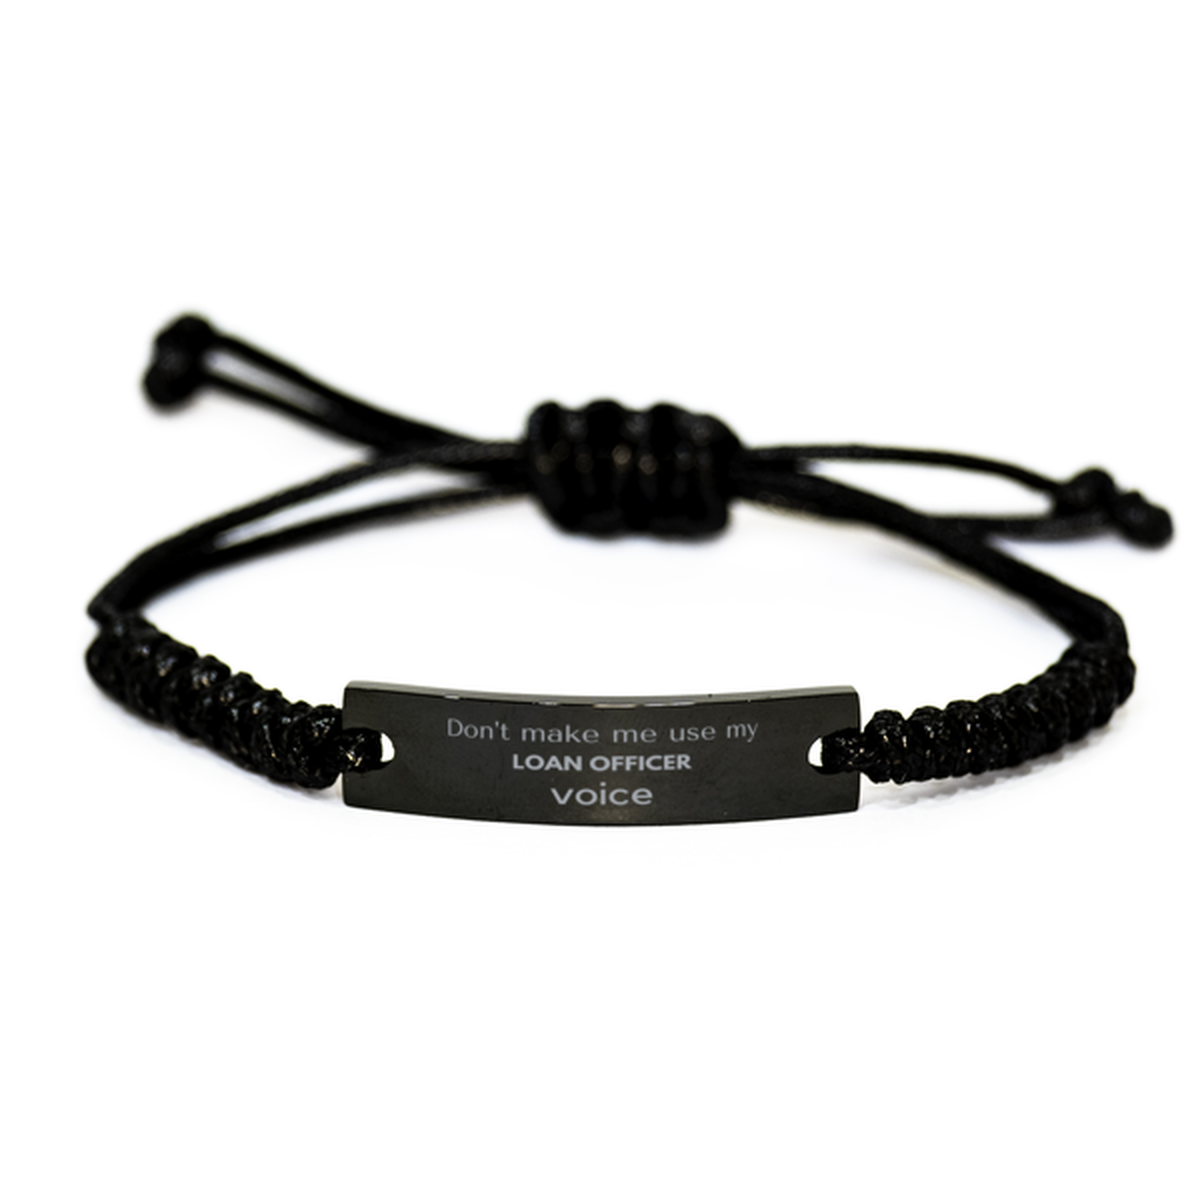 Don't make me use my Loan Officer voice, Sarcasm Loan Officer Gifts, Christmas Loan Officer Black Rope Bracelet Birthday Unique Gifts For Loan Officer Coworkers, Men, Women, Colleague, Friends